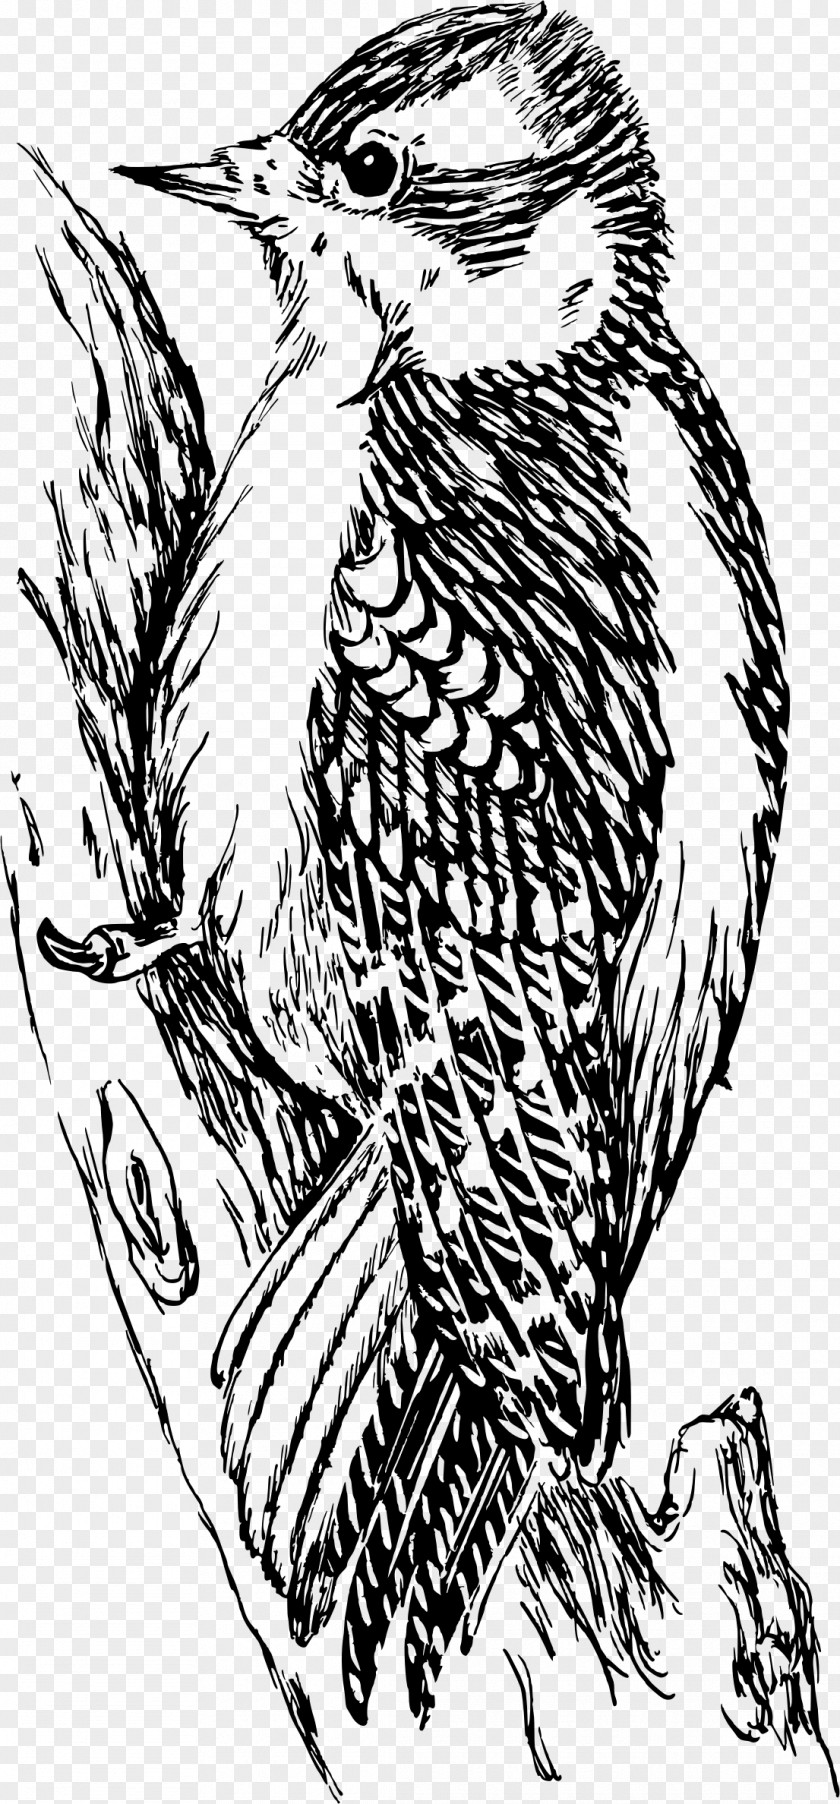 Bird Downy Woodpecker Black And White Clip Art PNG